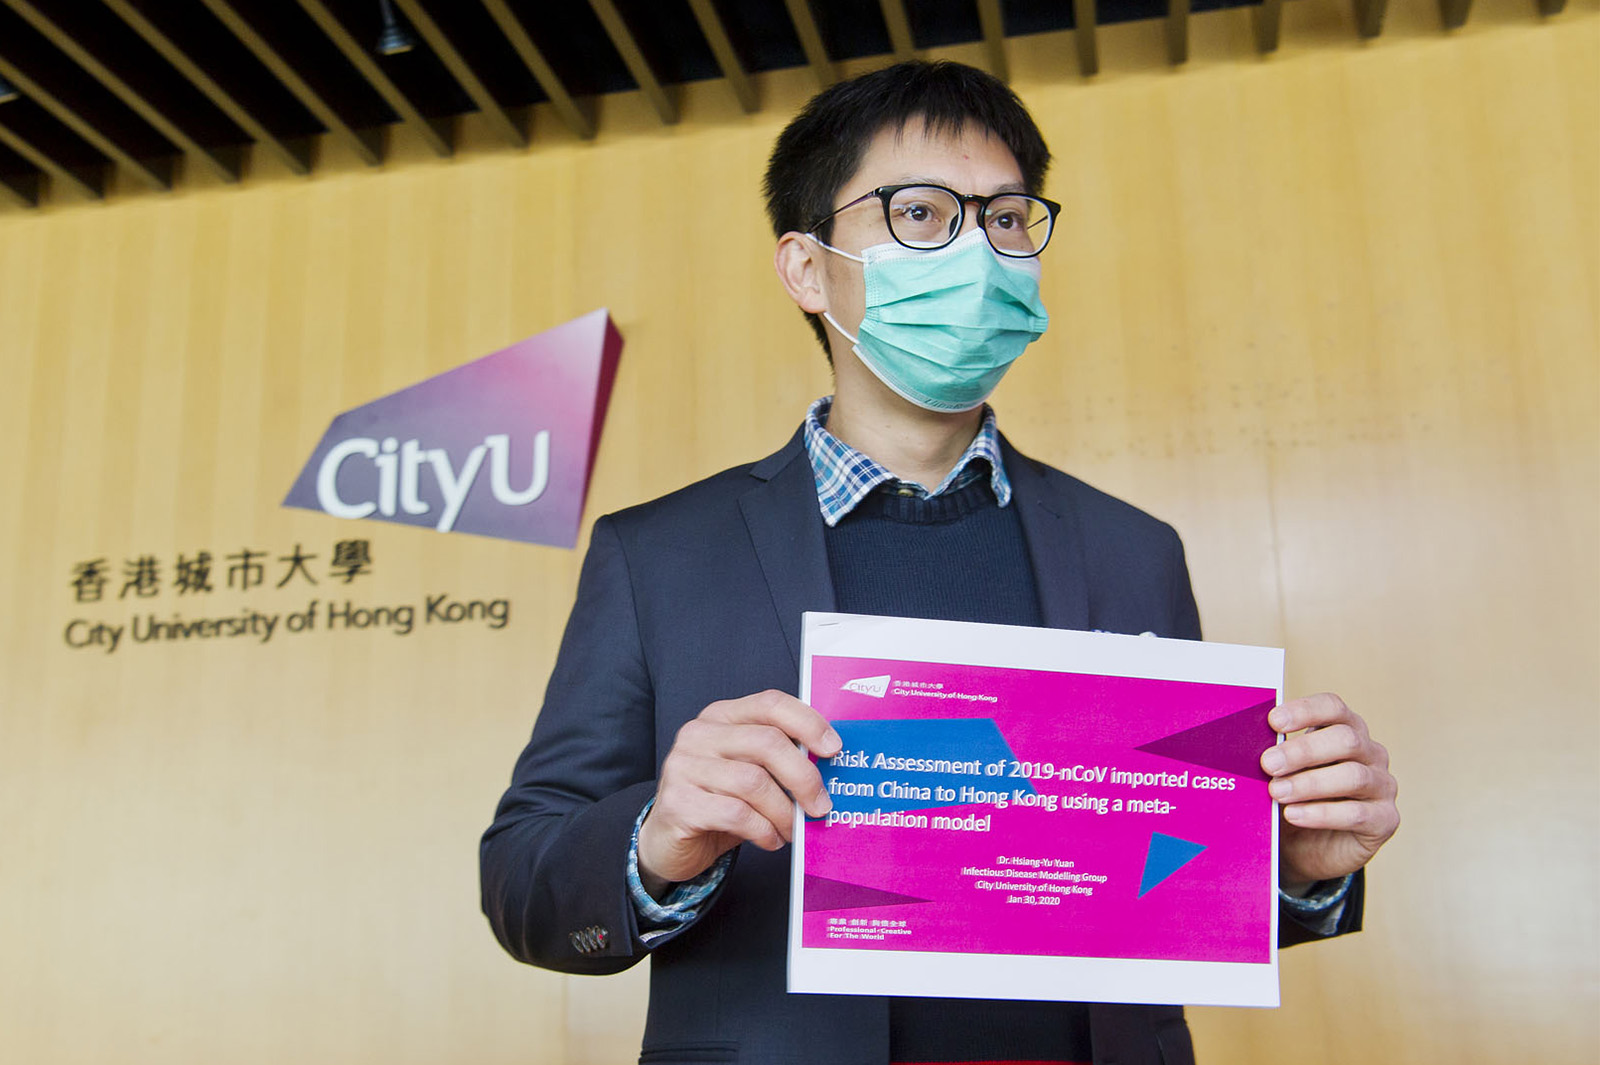 Dr Sean Yuan Hsiang-yu shared the research outcome on the risk of outbreaks of a novel coronavirus in local communities after the Chinese New Year holidays. 